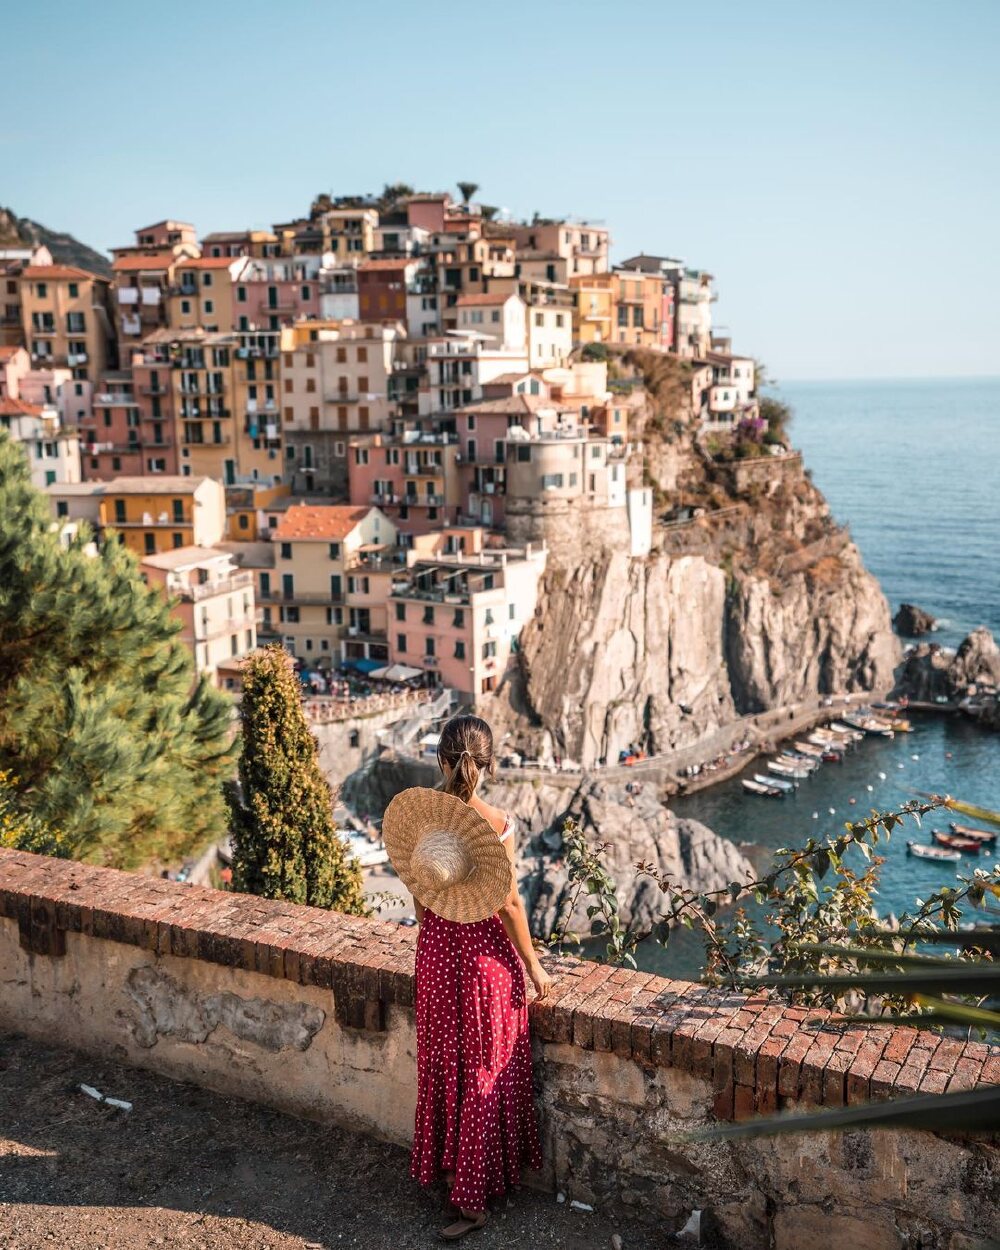 1-Week Itinerary in Cinque Terre